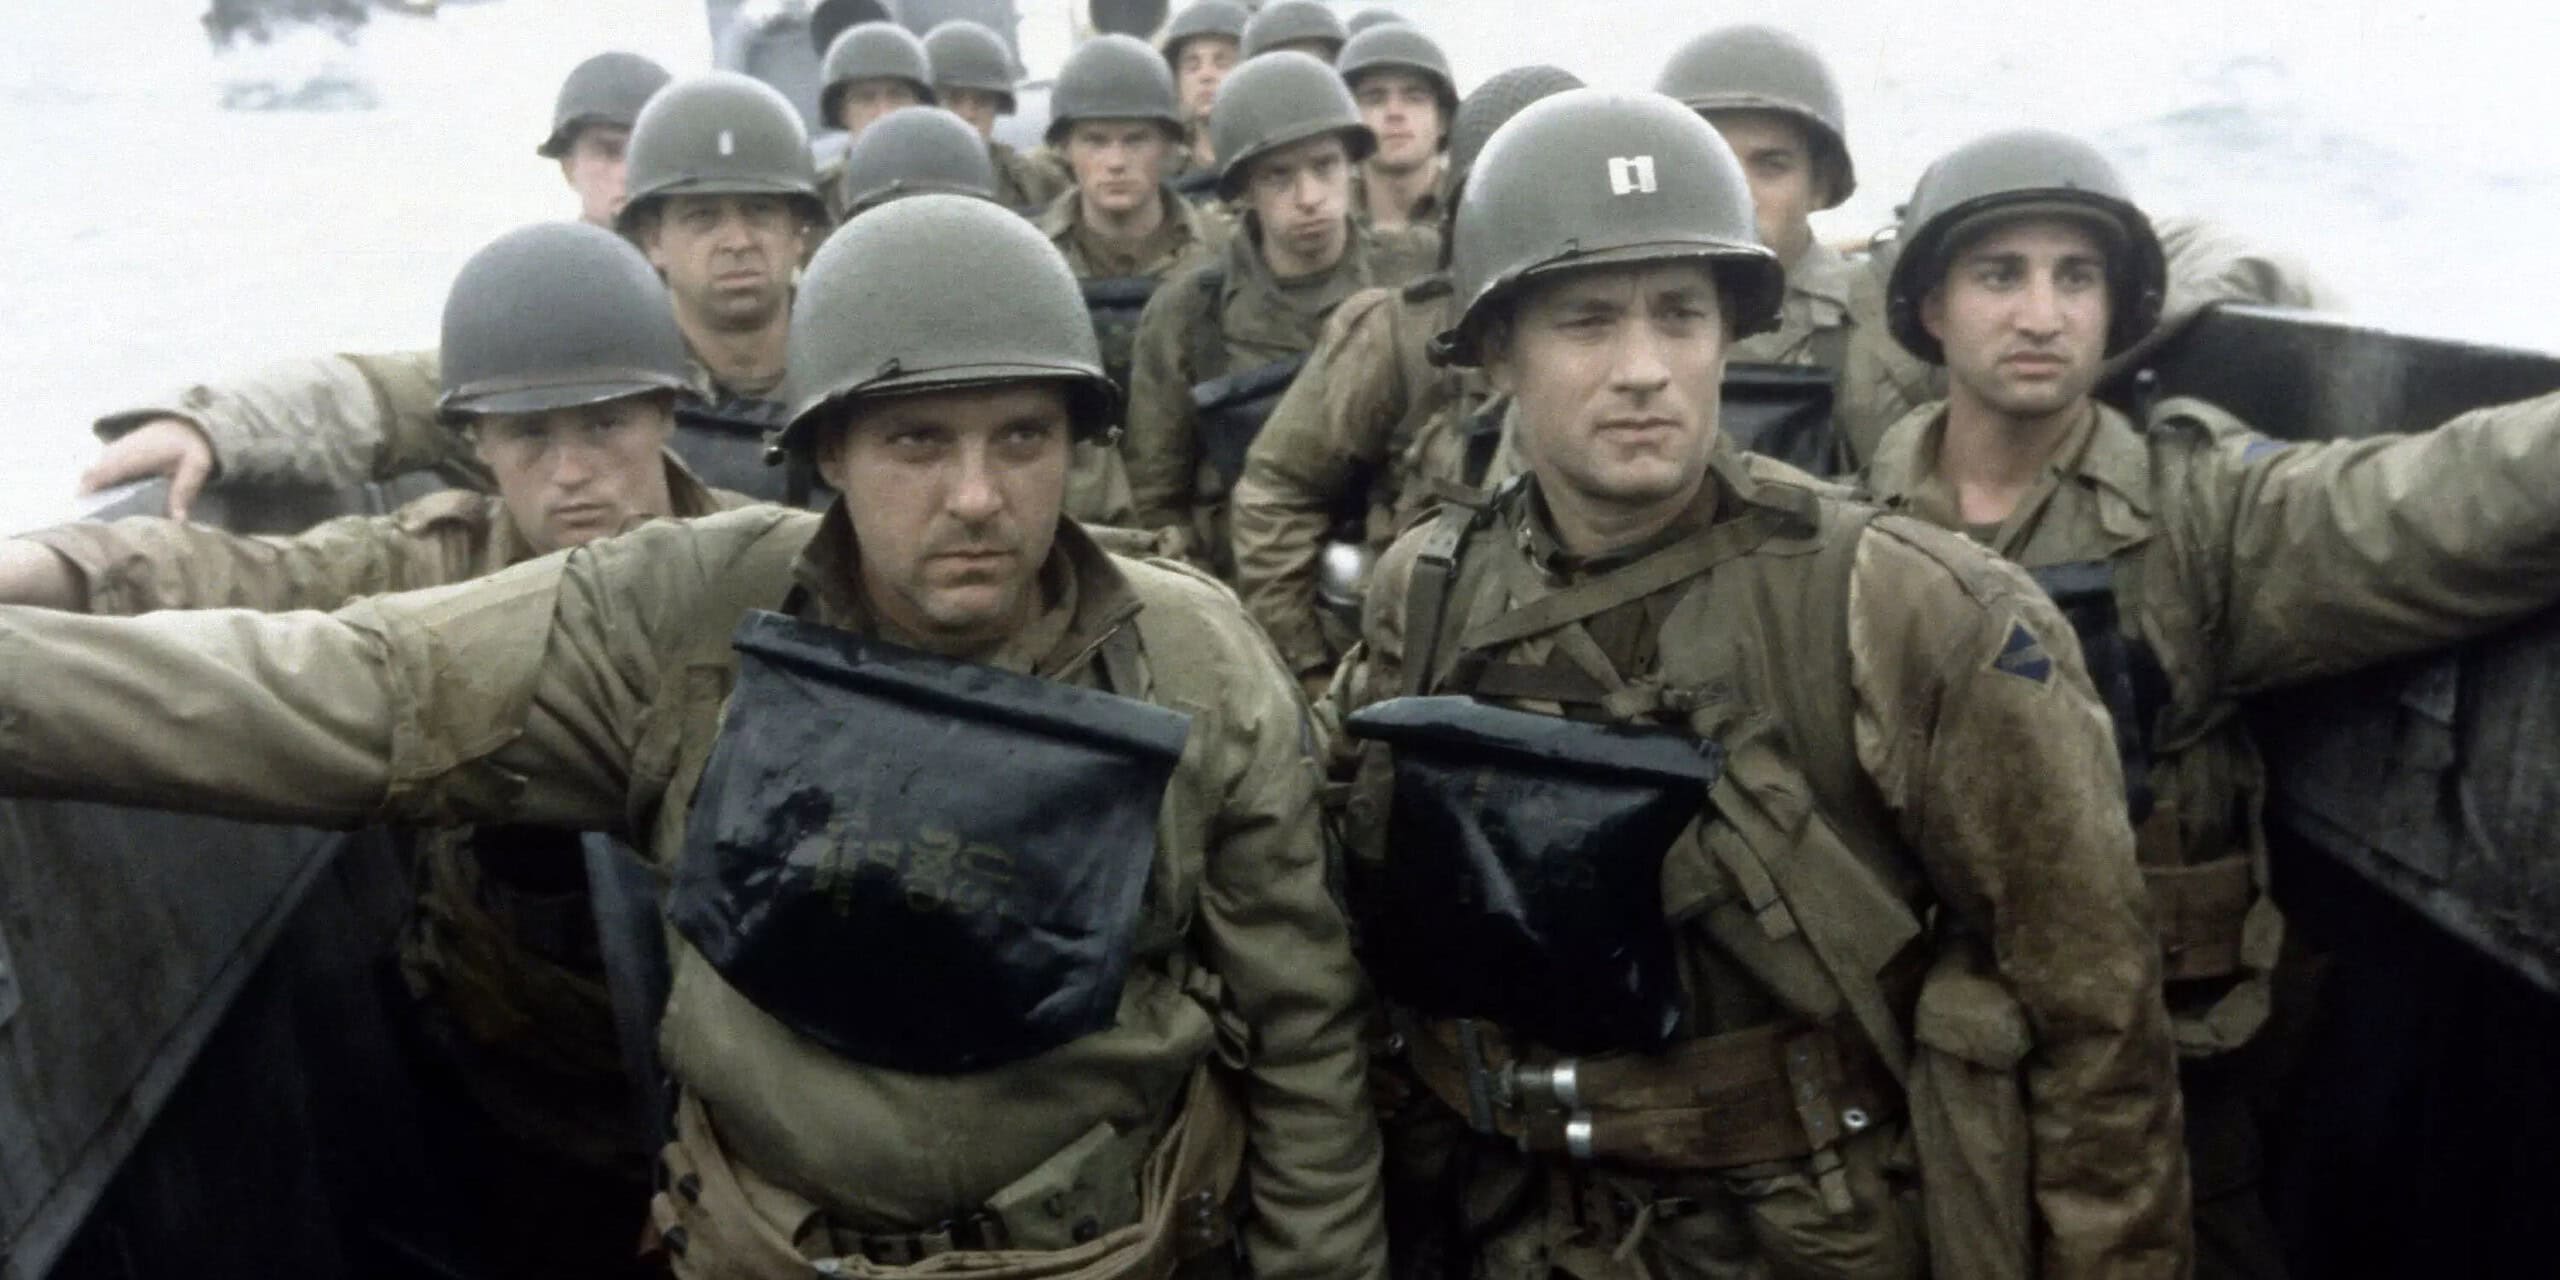 Top 6 D-Day Films That Capture the Essence of June 6, 1944